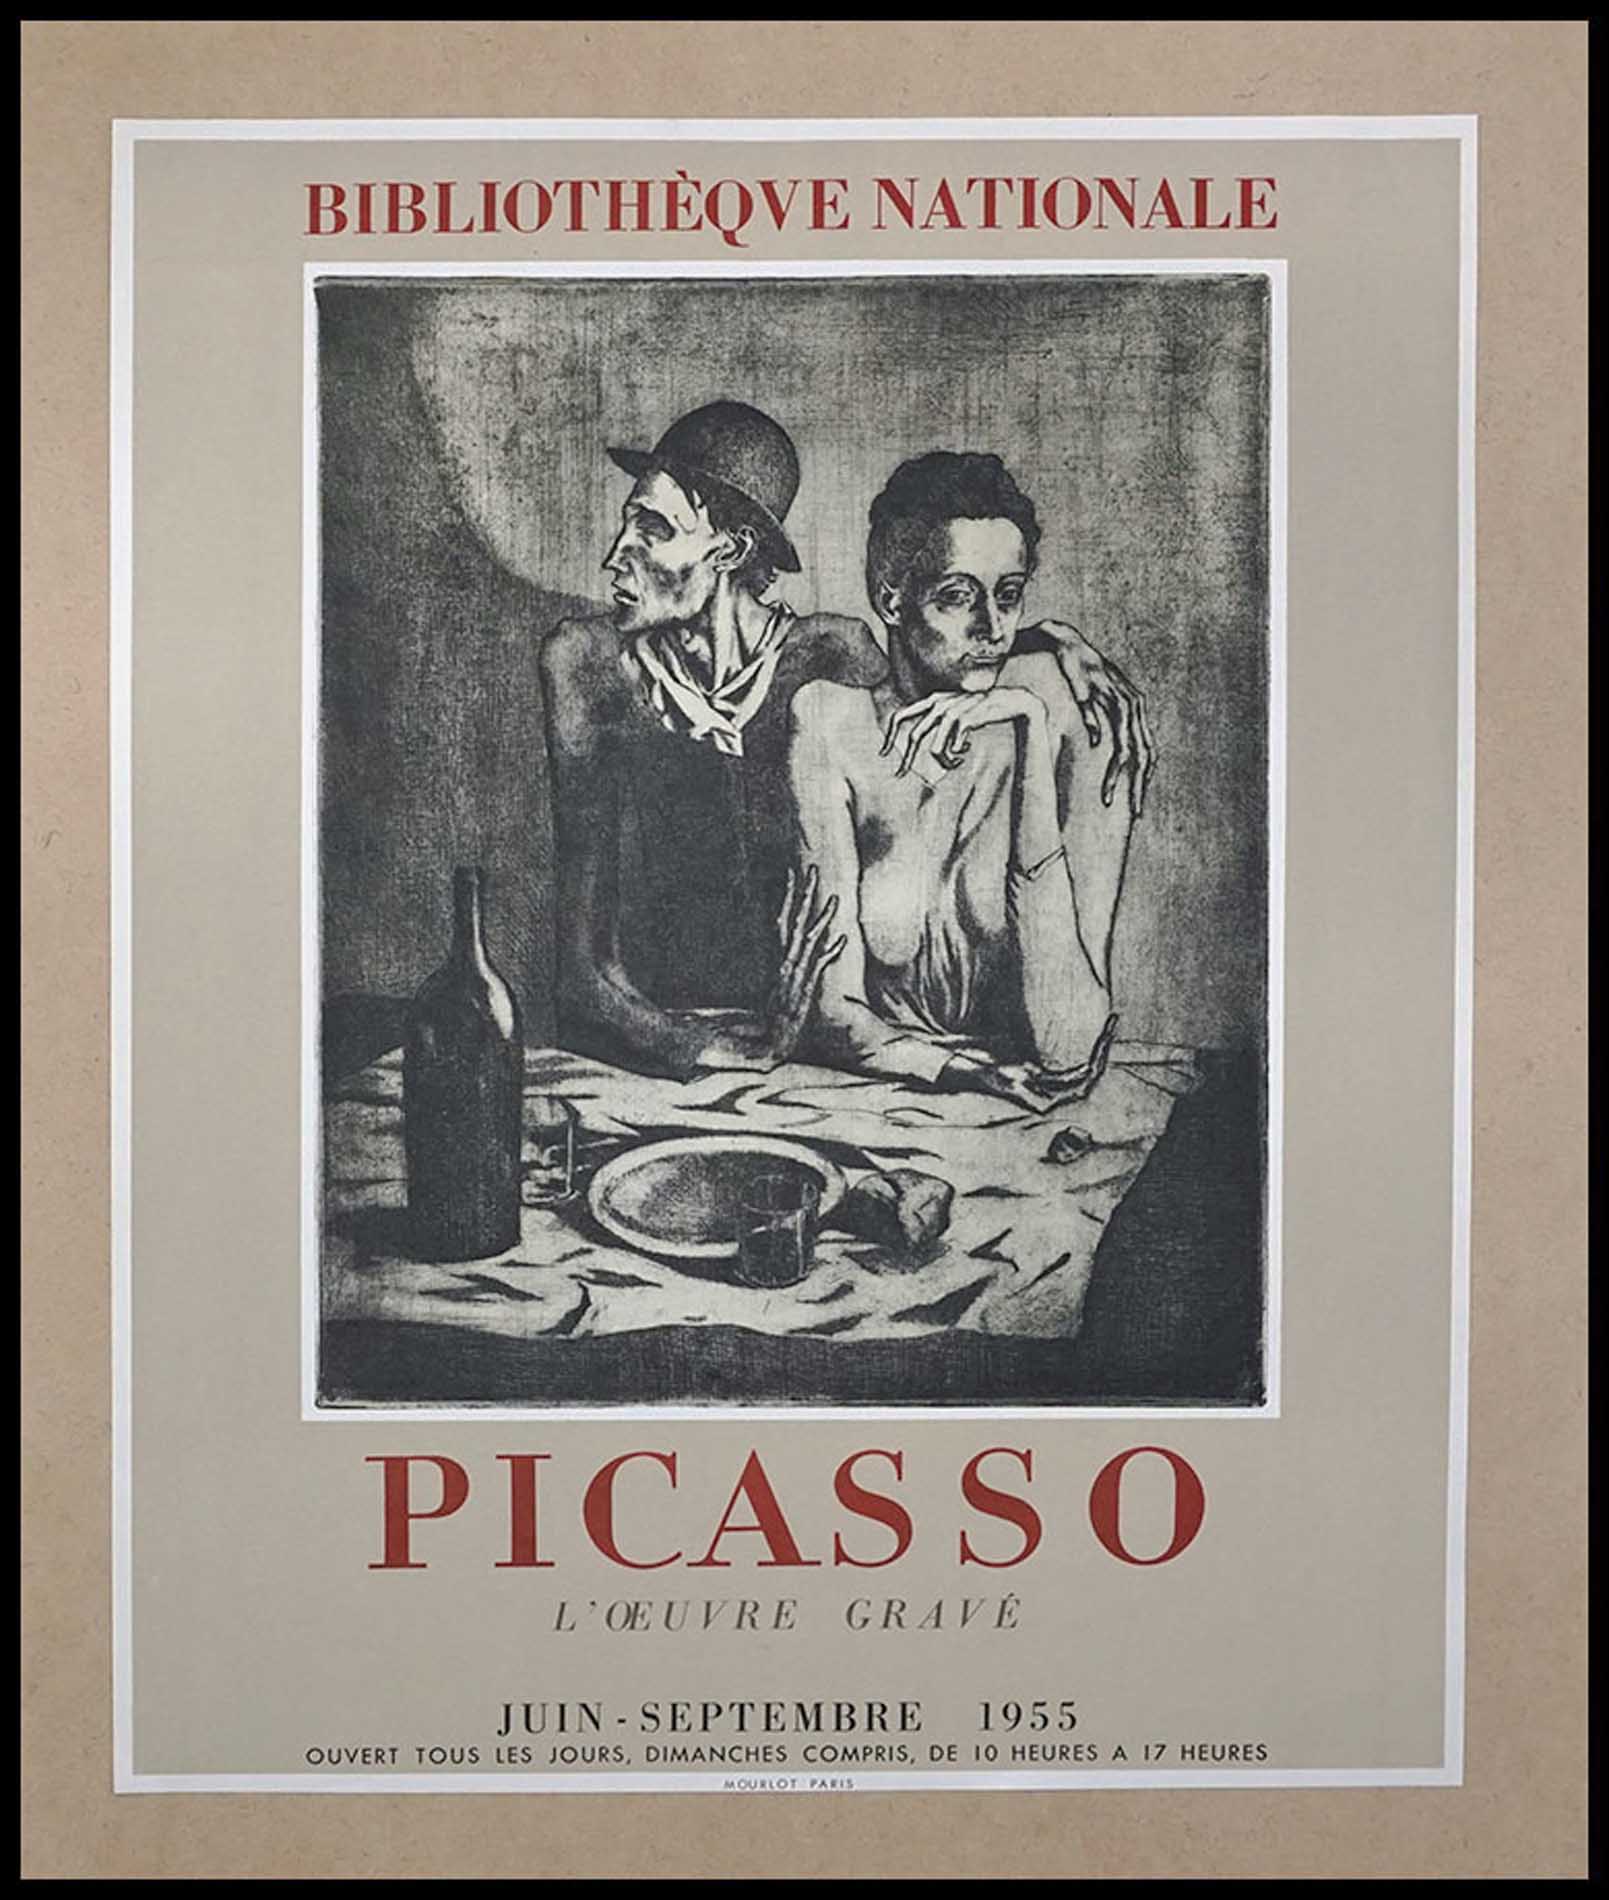 Pablo Picasso, Bibliotheque nationale